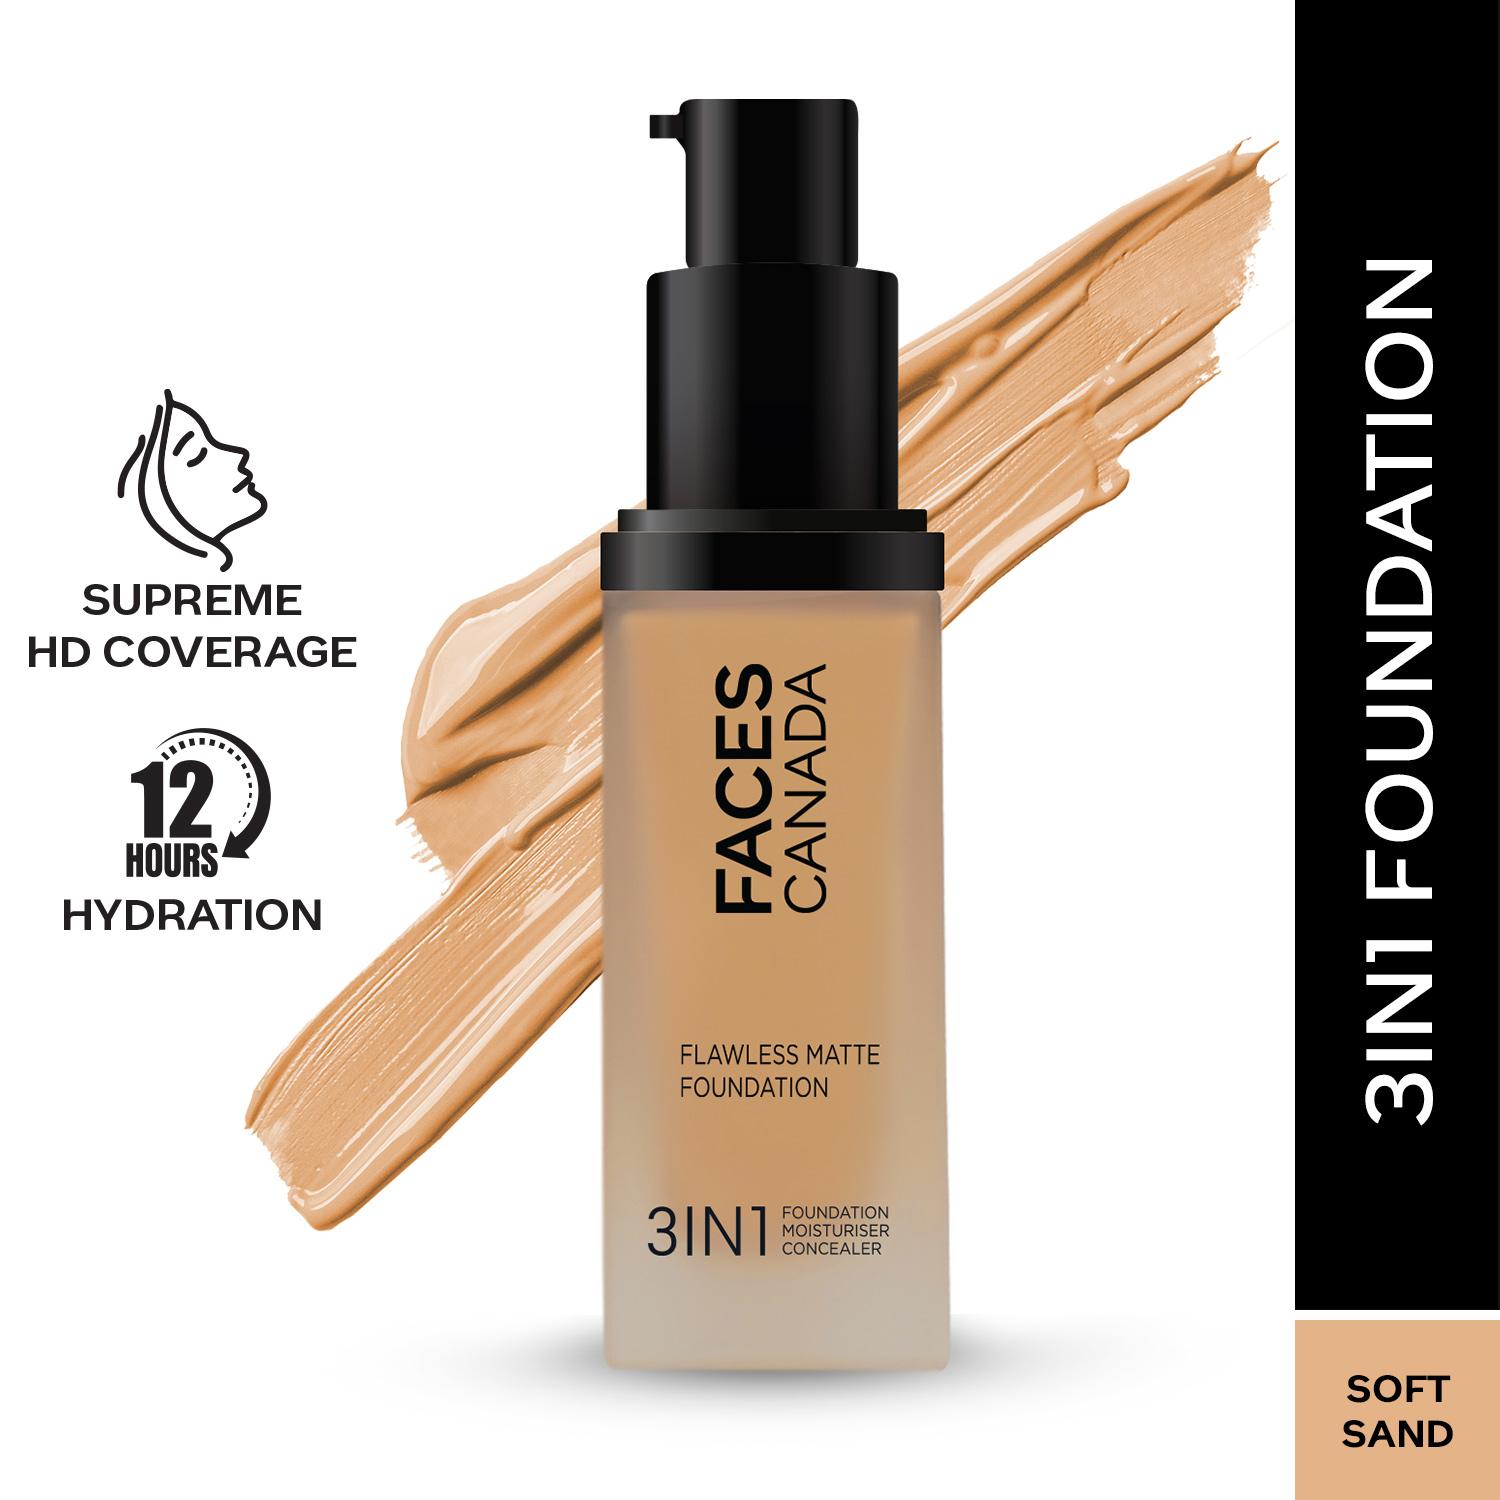 Faces Canada | Faces Canada Flawless Matte Foundation - Soft Sand 041, 12 HR Hydration + SPF 18 (30 ml)